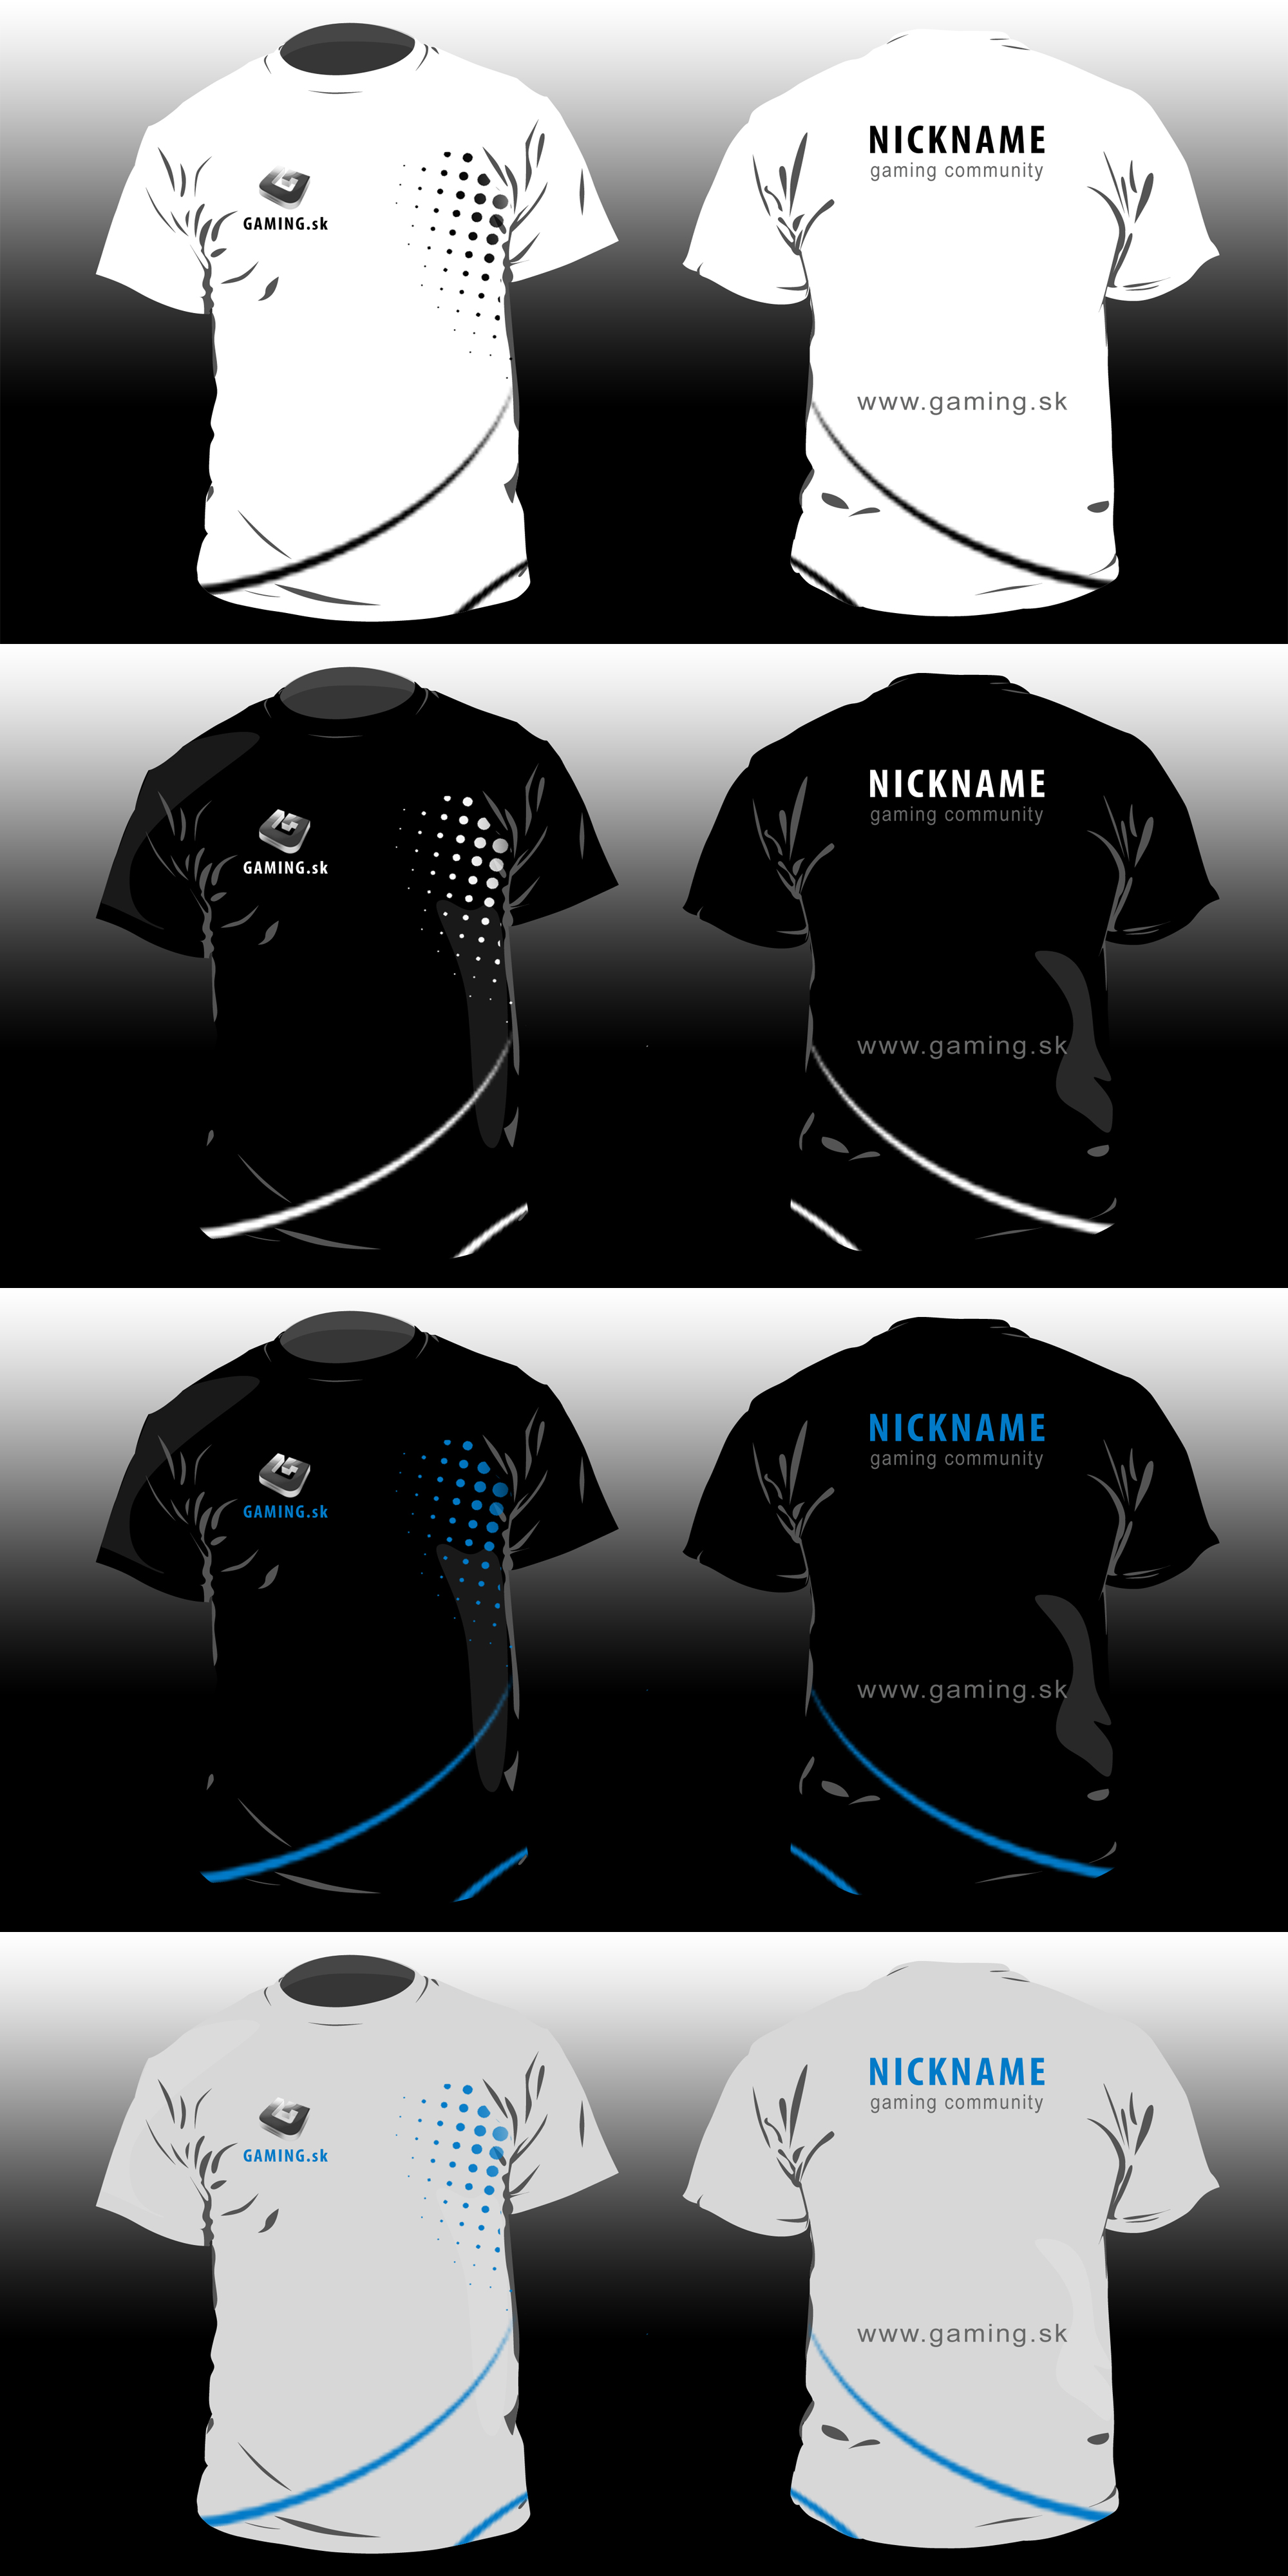 GAMING.sk SHIRT layout by swift20 on DeviantArt